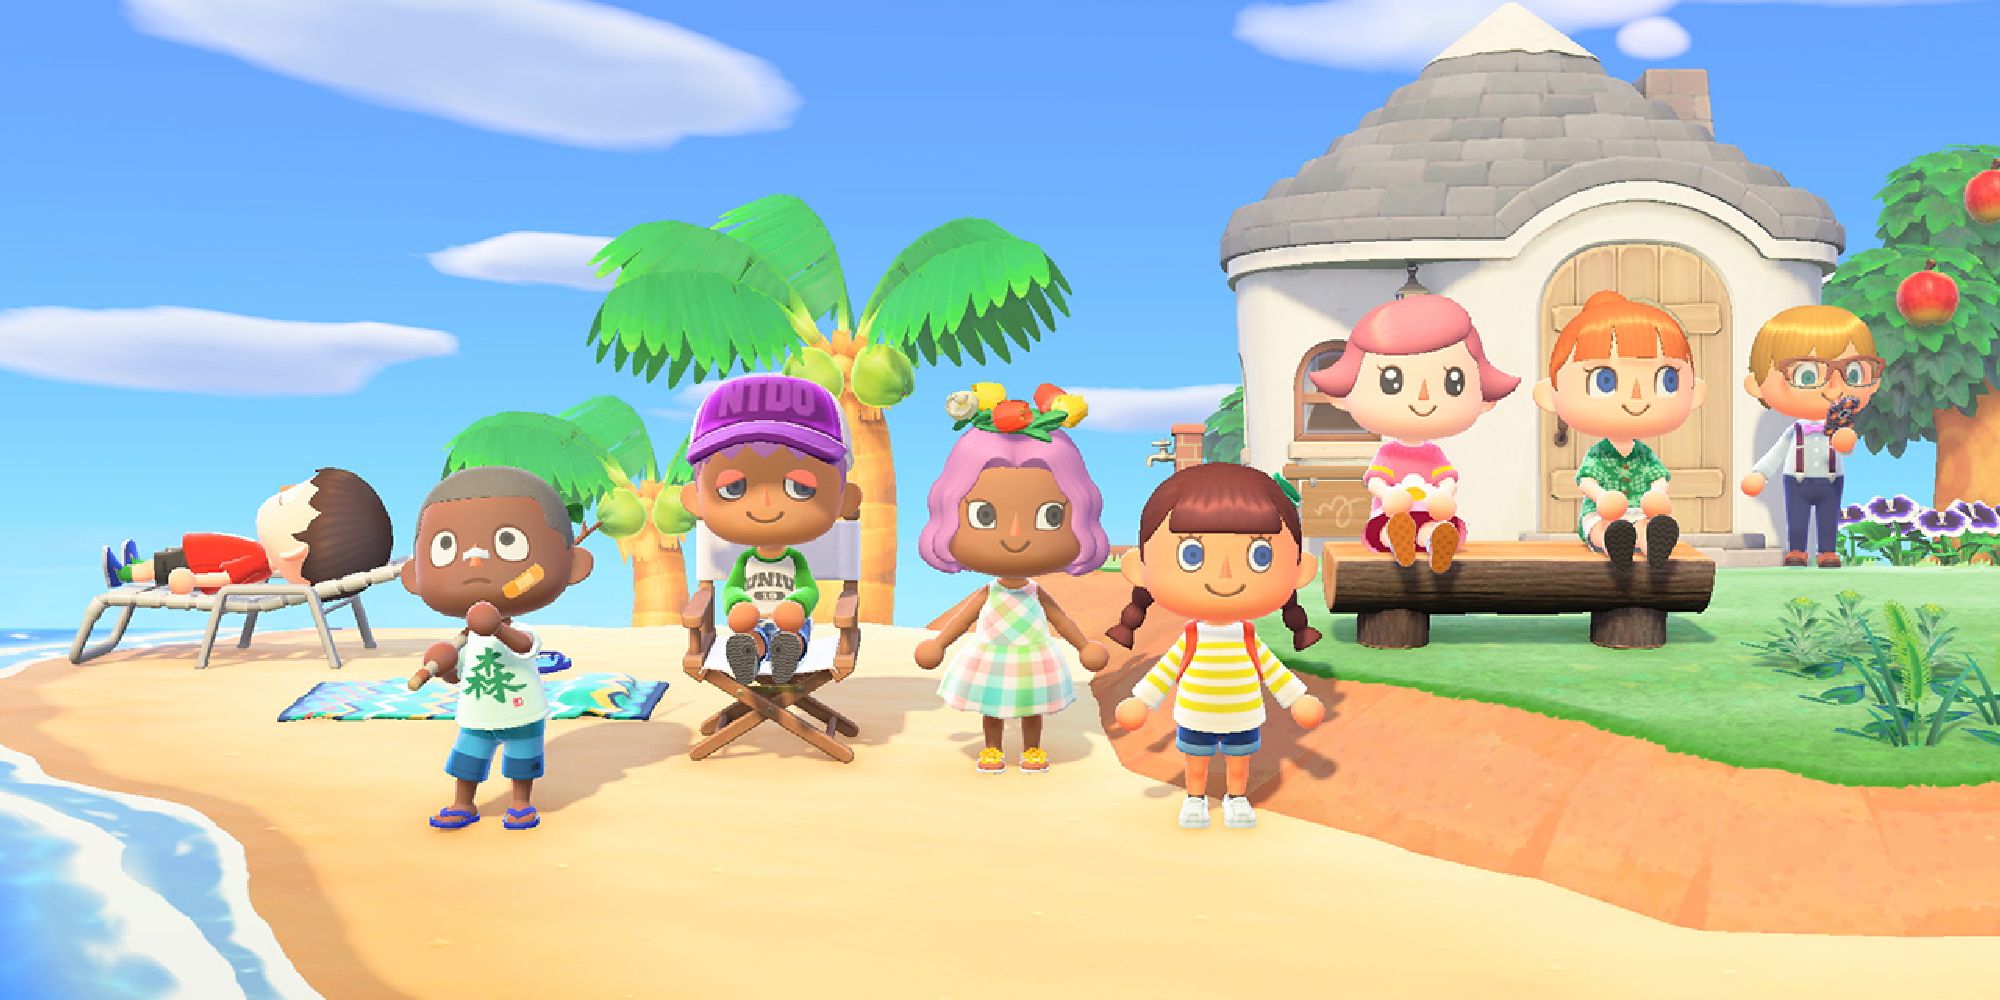 Animal Crossing: New Horizons': Release Date And 5 Things To Know